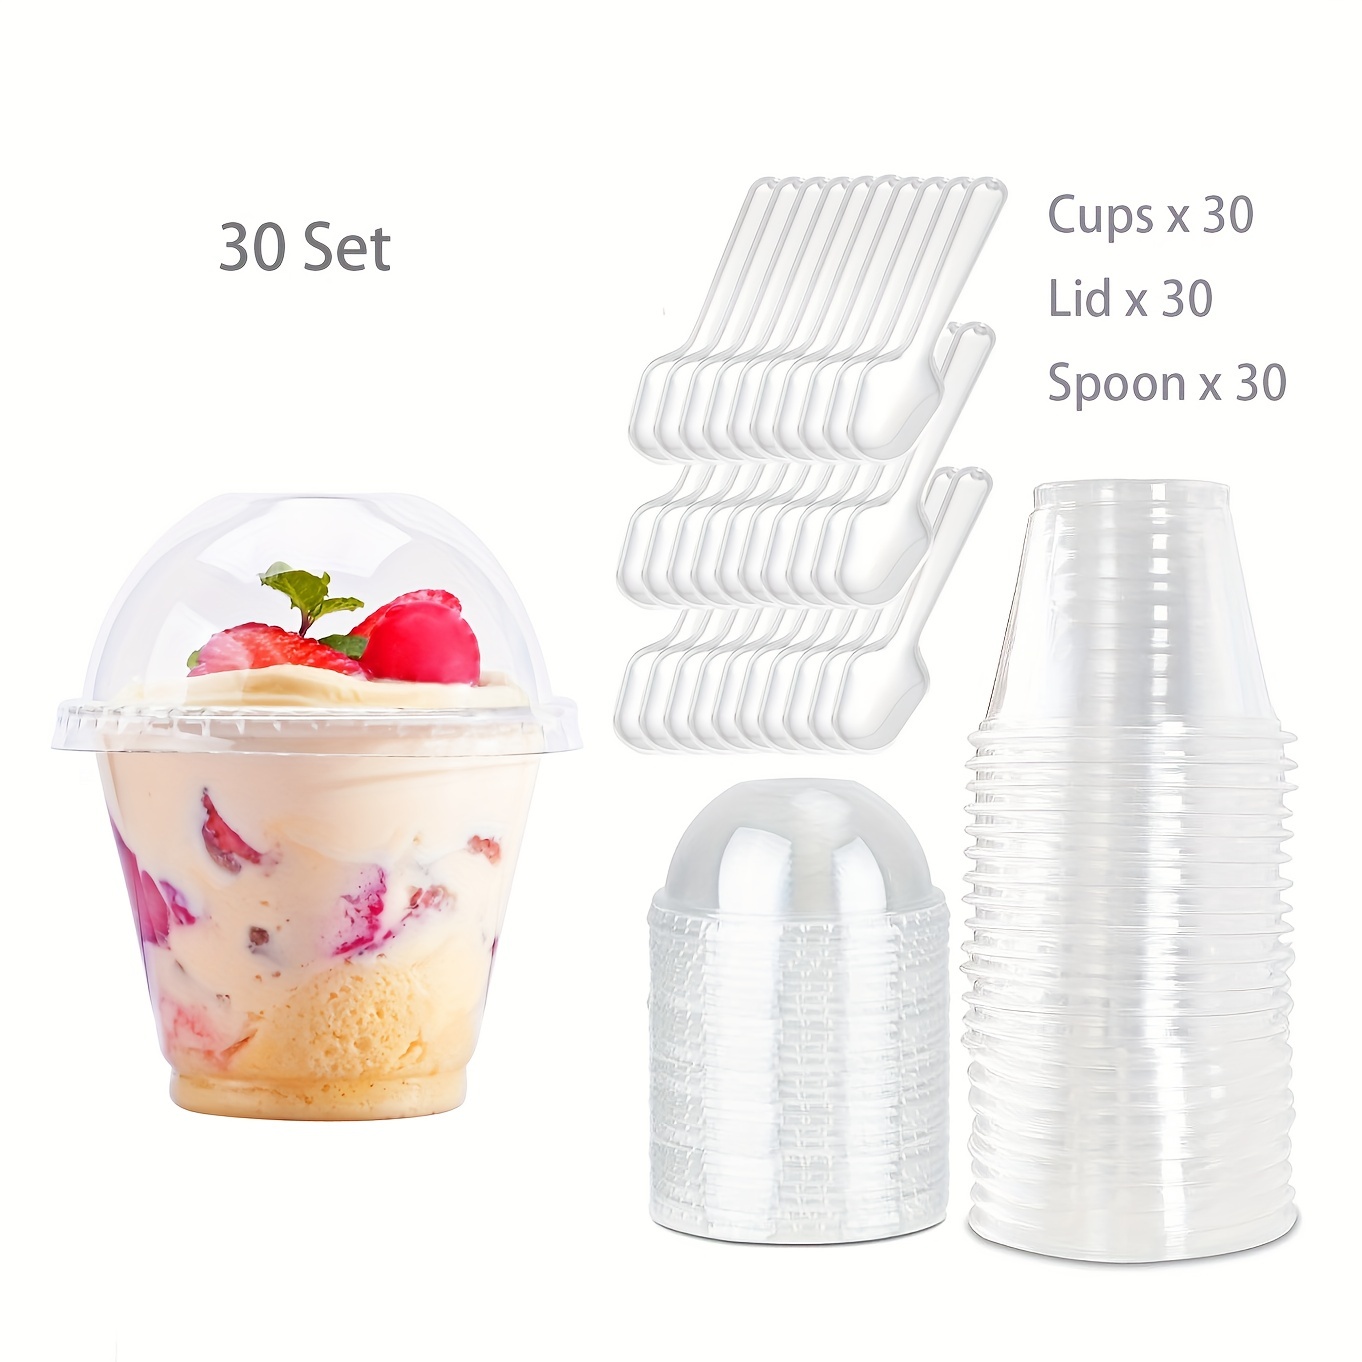 100 Ct 2 Oz Clear Plastic Portion Cups, Jello Shot Condiment Sauce Dip  Party Mixing Sampling, BPA Free Made in USA, Reusable & Disposable 